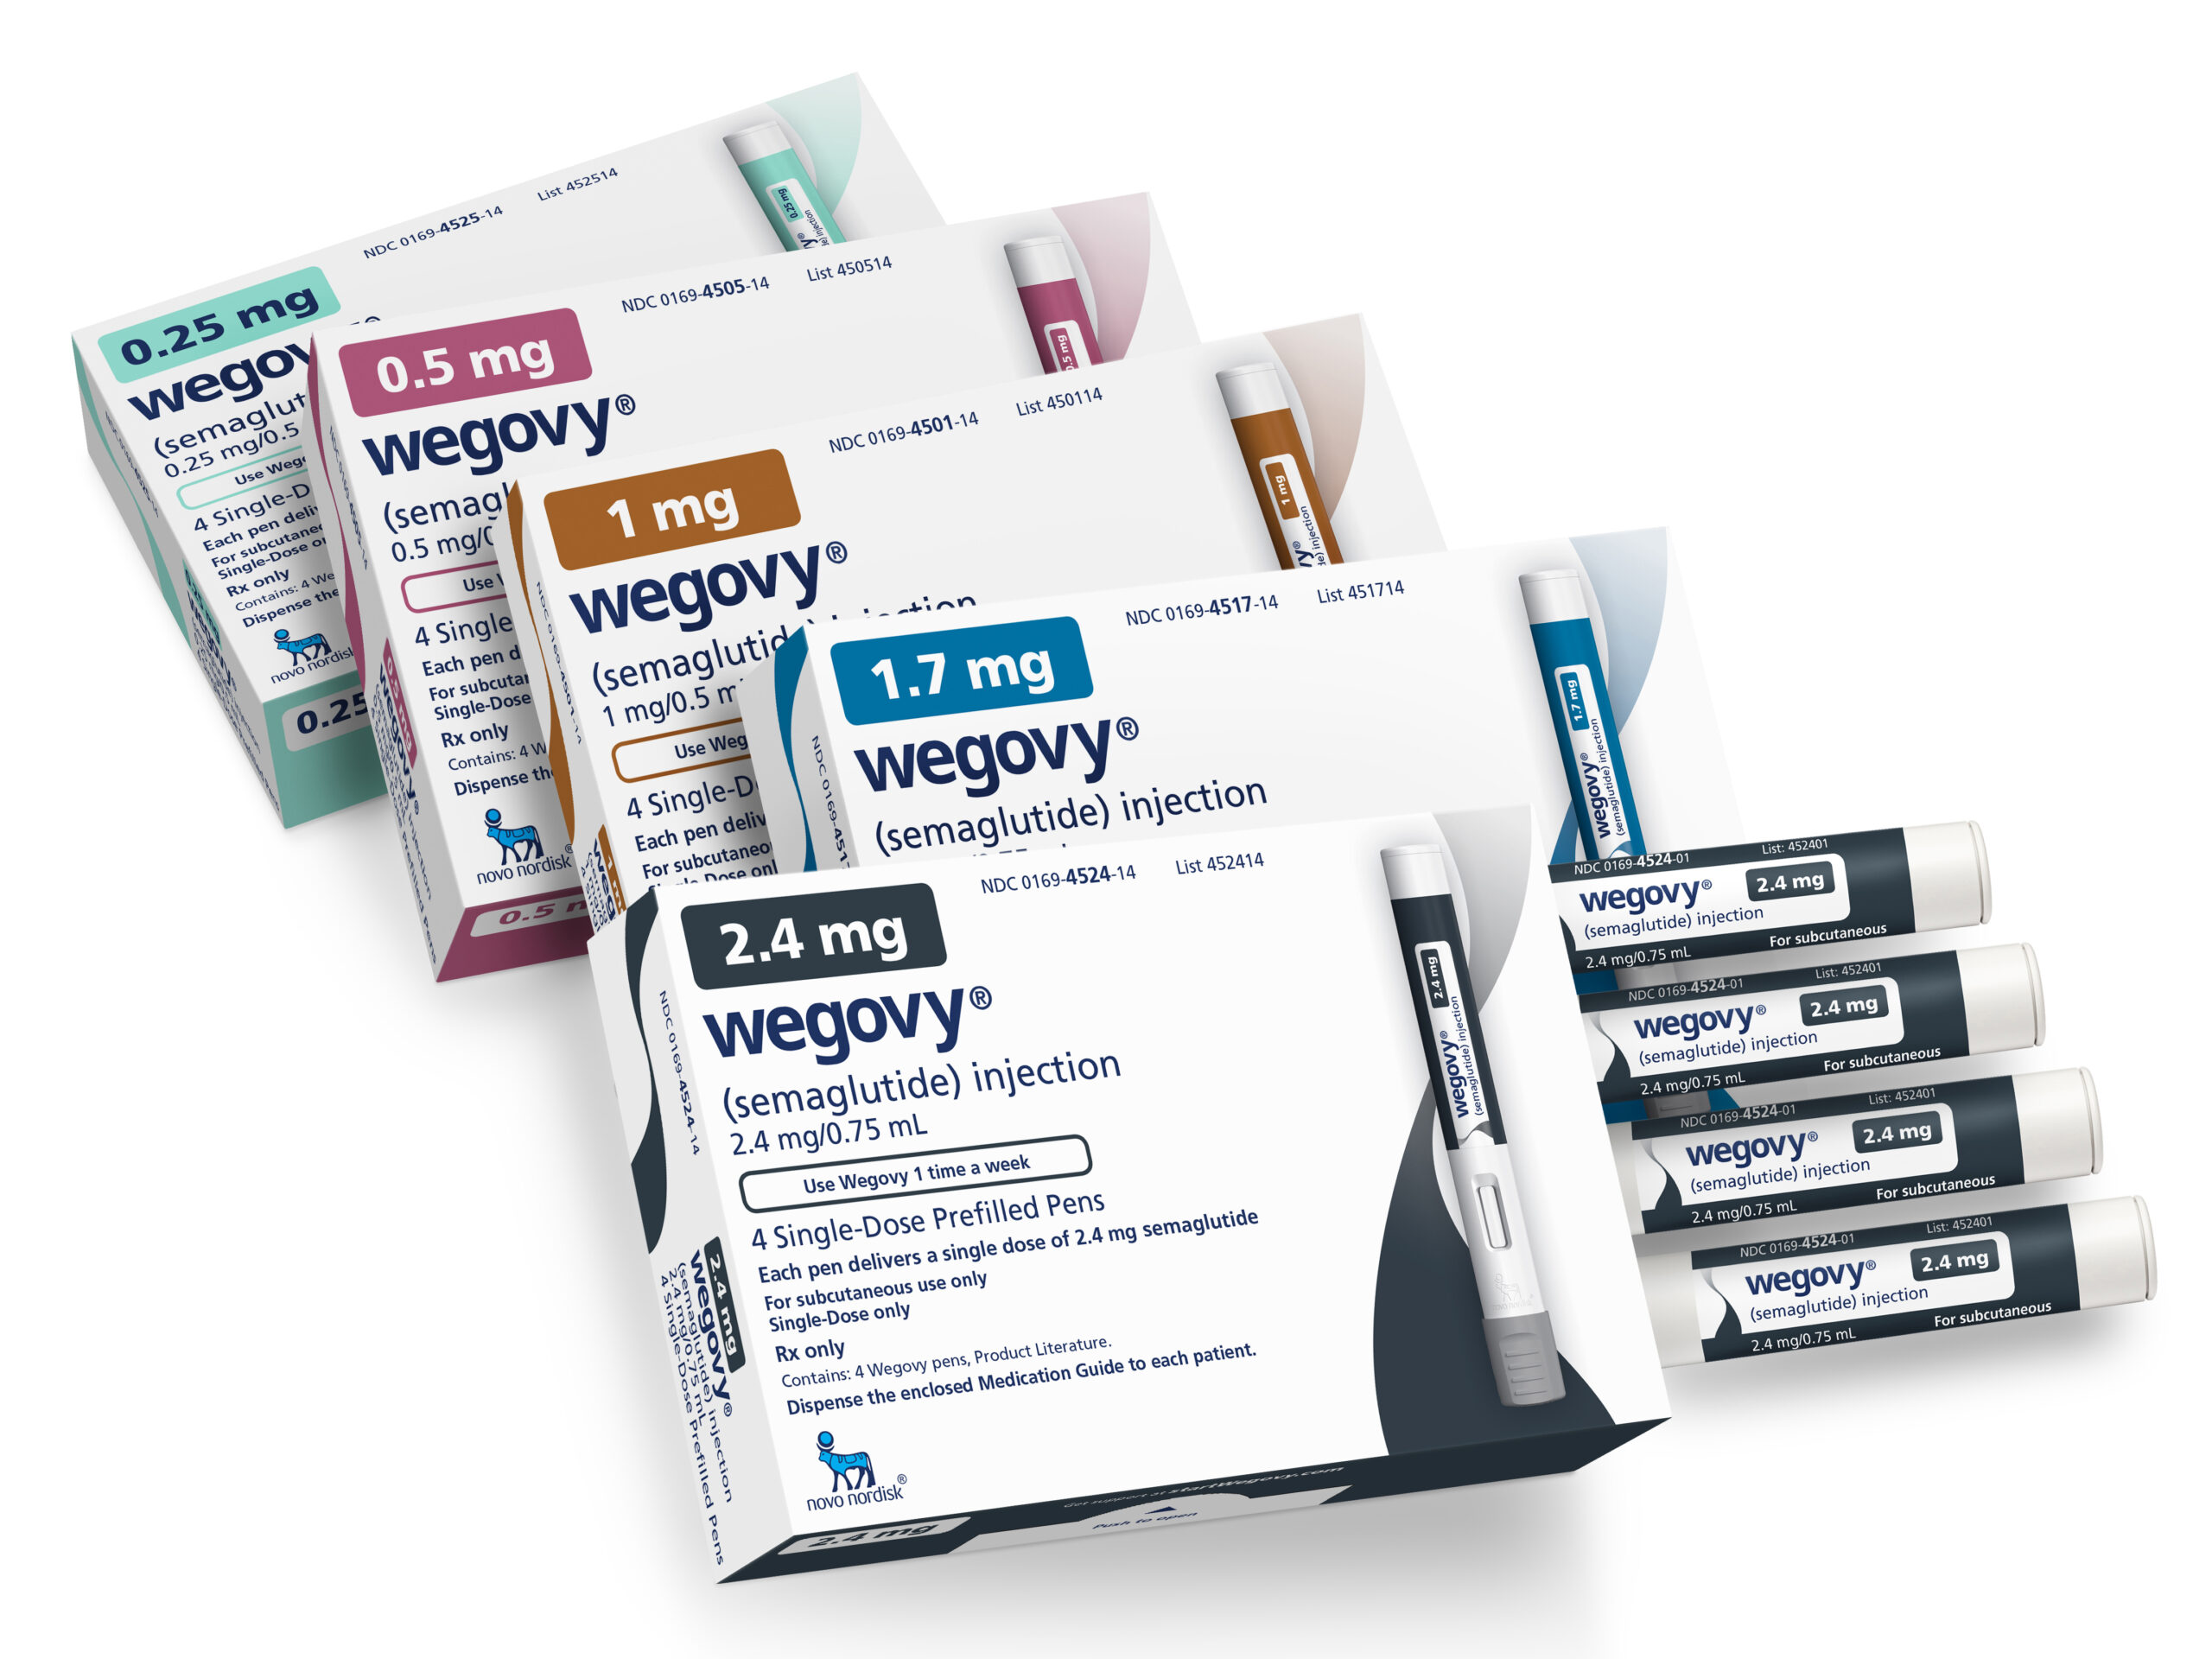 FDA approves Wegovy for lowering heart attack and stroke risk in overweight patients